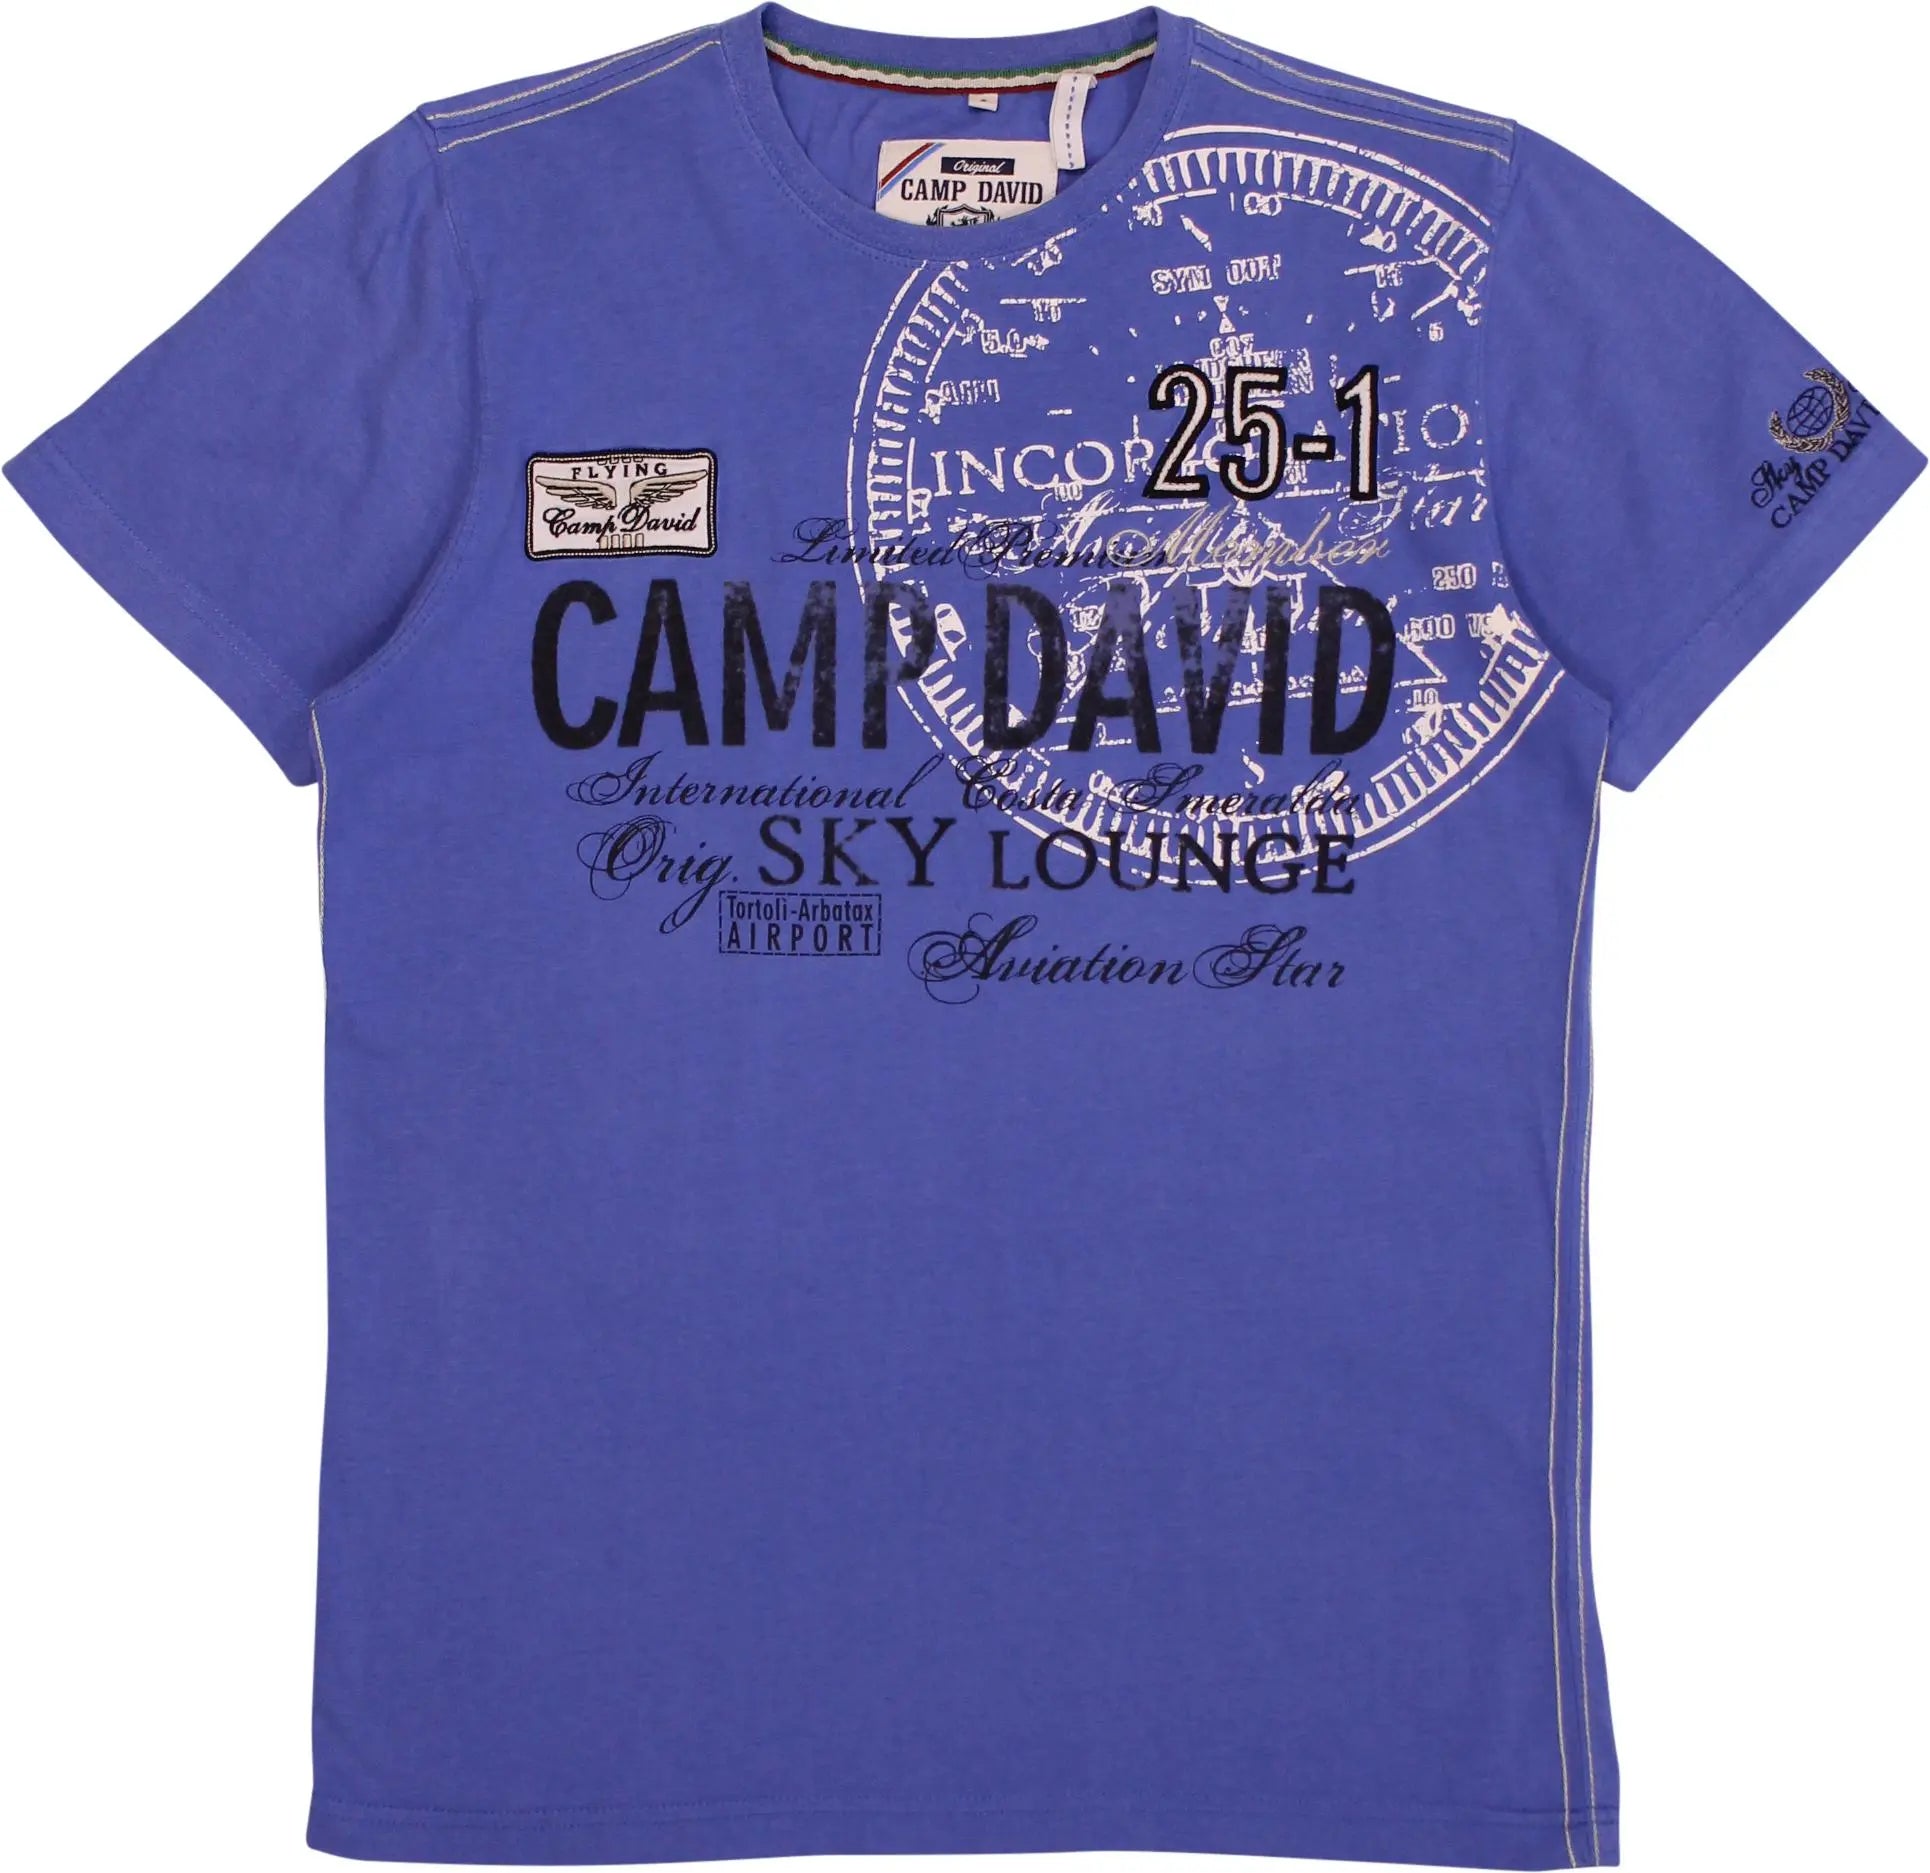 Camp David - T-shirt by Camp David- ThriftTale.com - Vintage and second handclothing